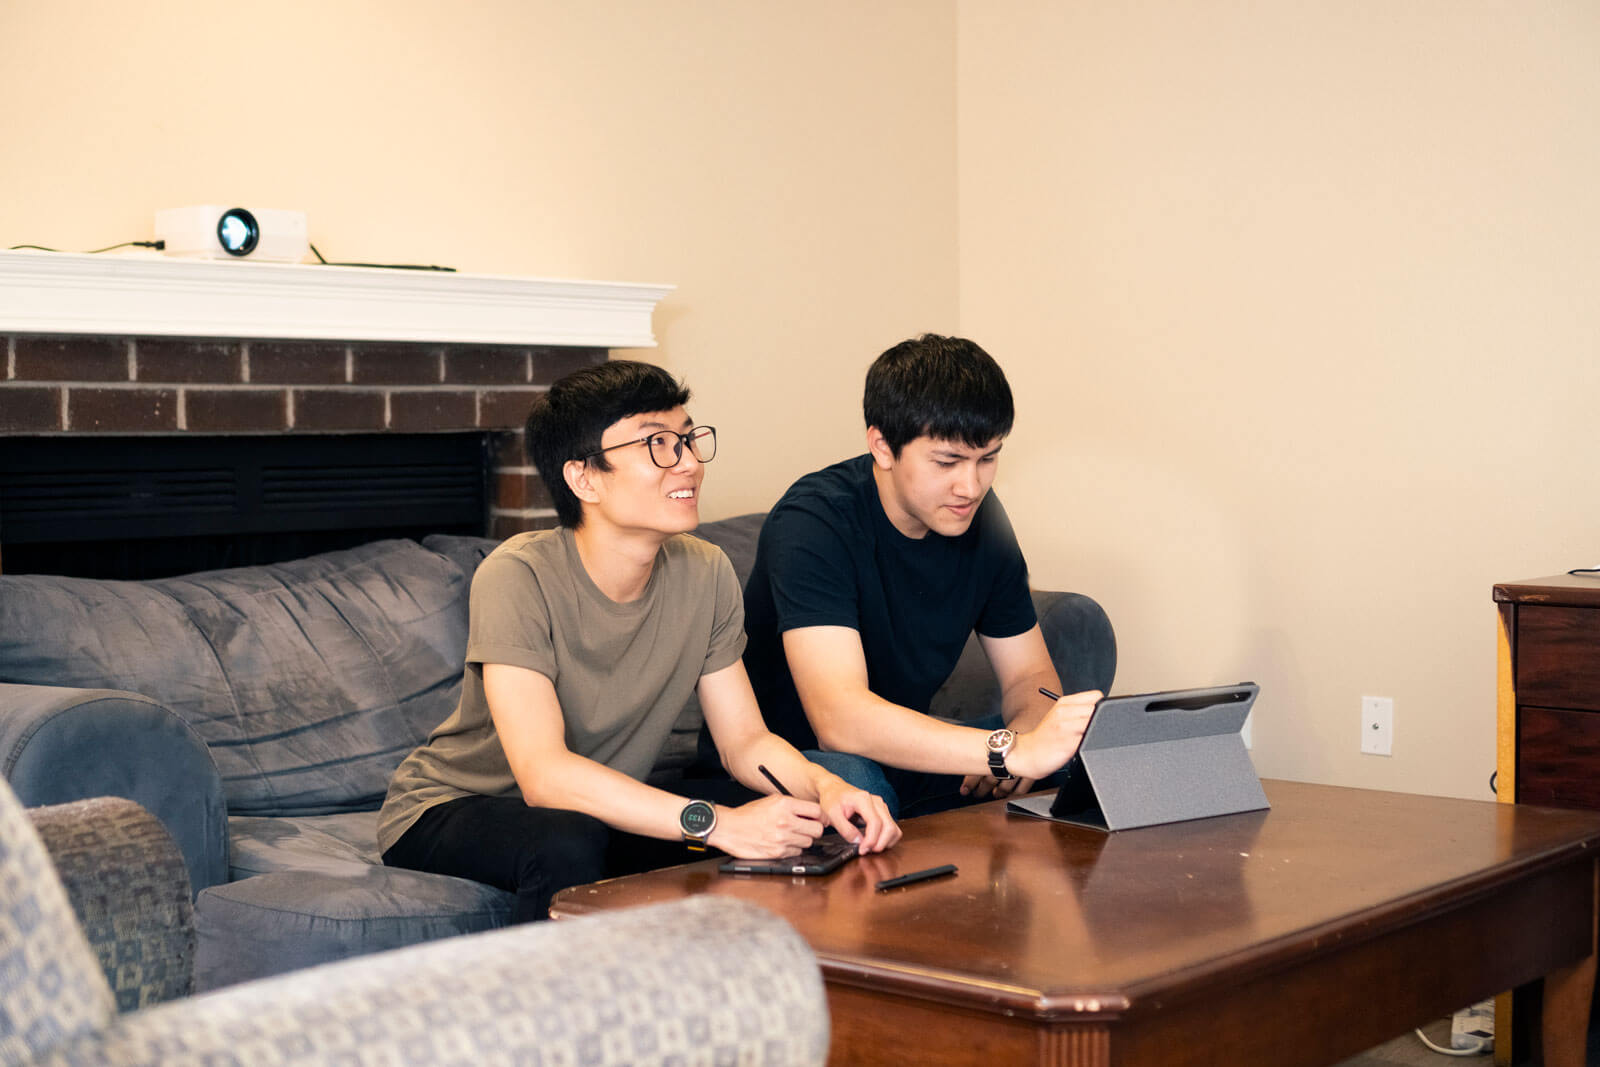 Two students sit together on a couch in a student apartment.